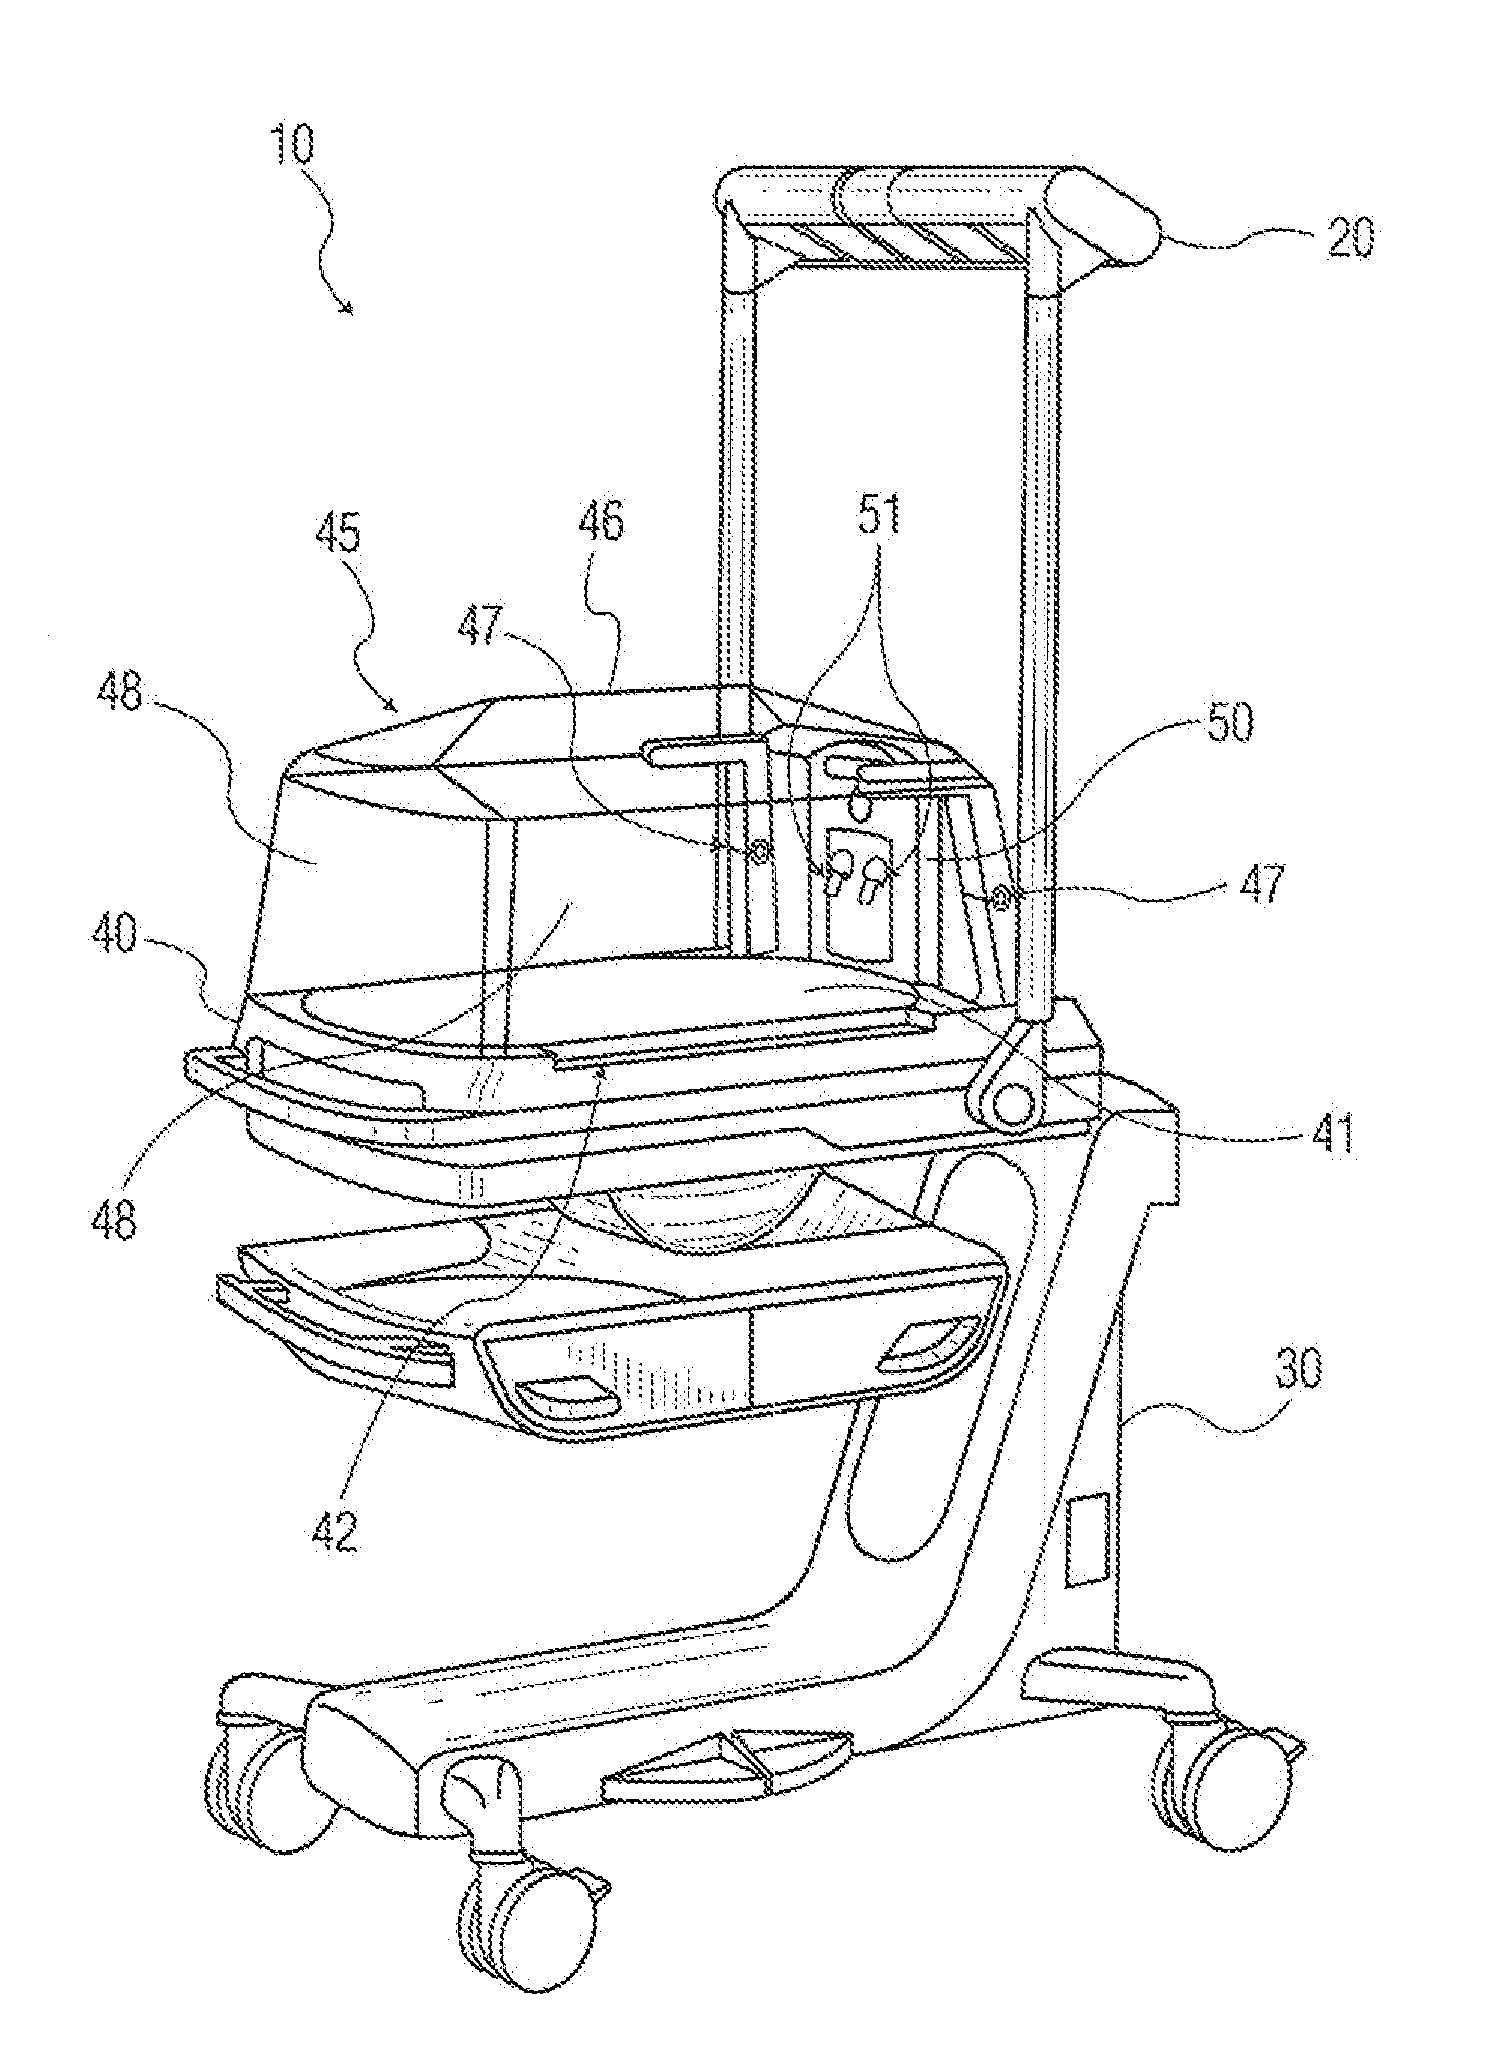 Warming therapy device including heated mattress assembly